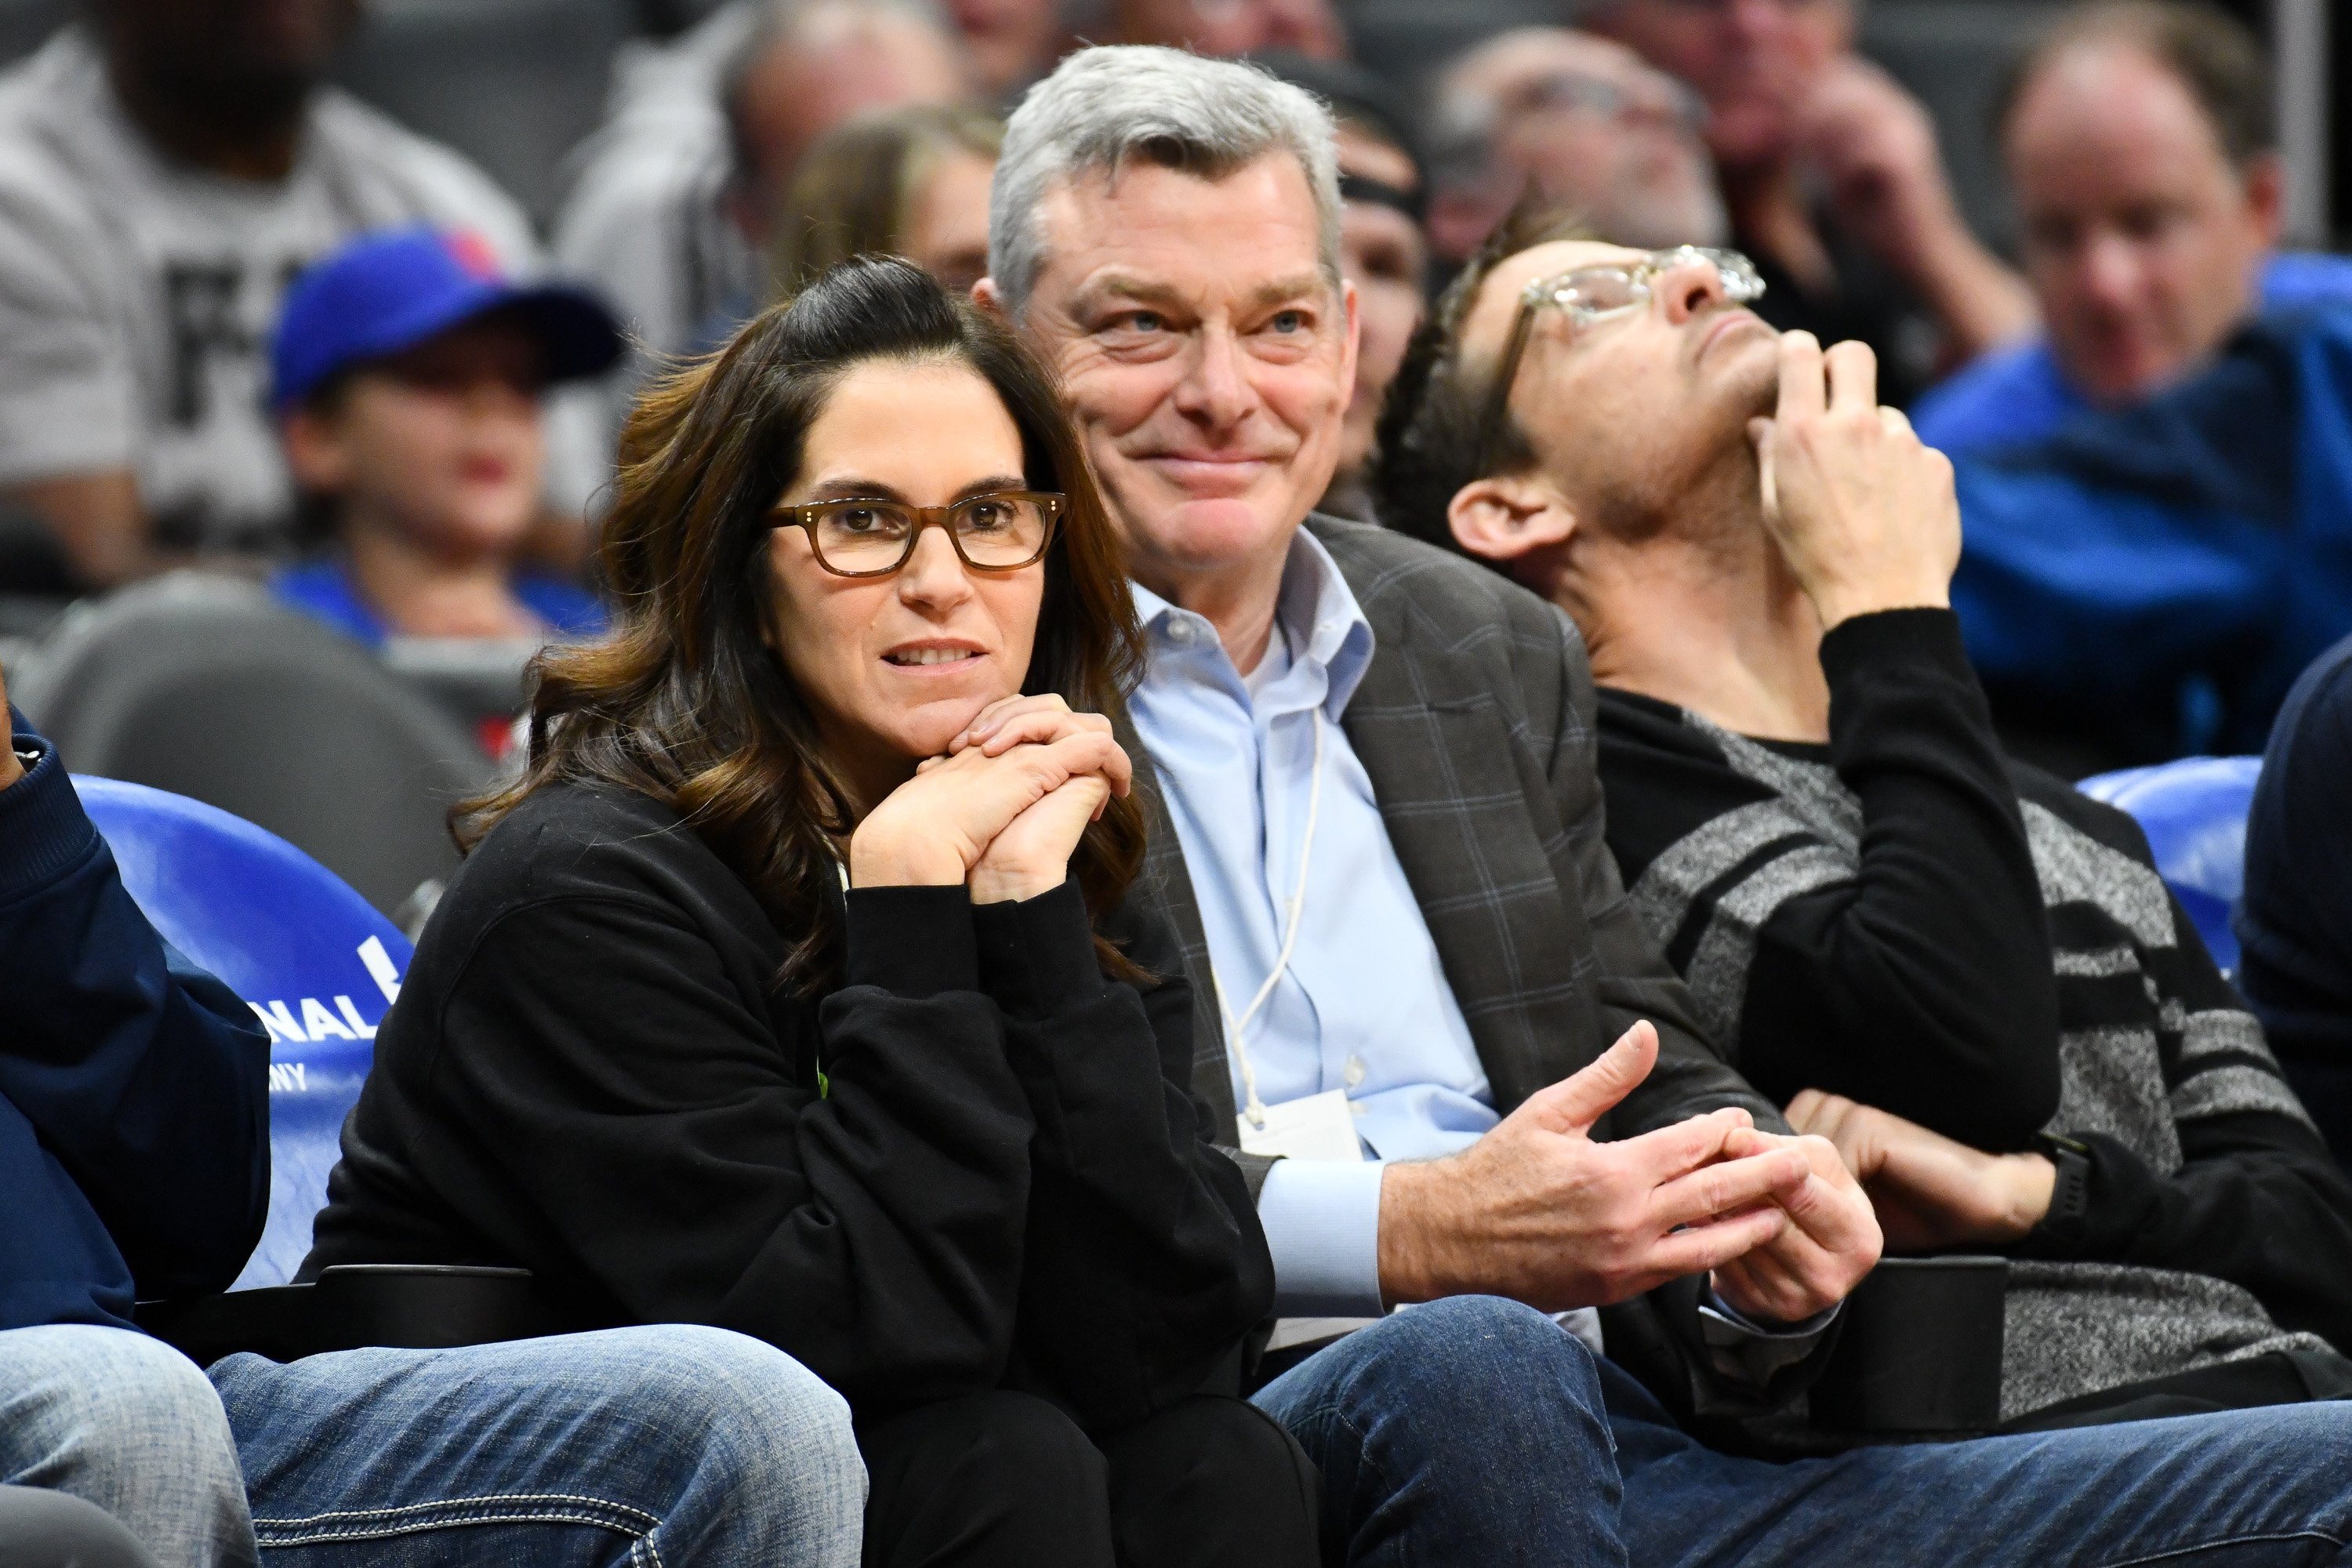 ami Gertz and Antony Ressler attend a basketball game between the Los Angeles Clippers and the Atlanta Hawks at Staples Center on January 28, 2019. | Source: Getty Images